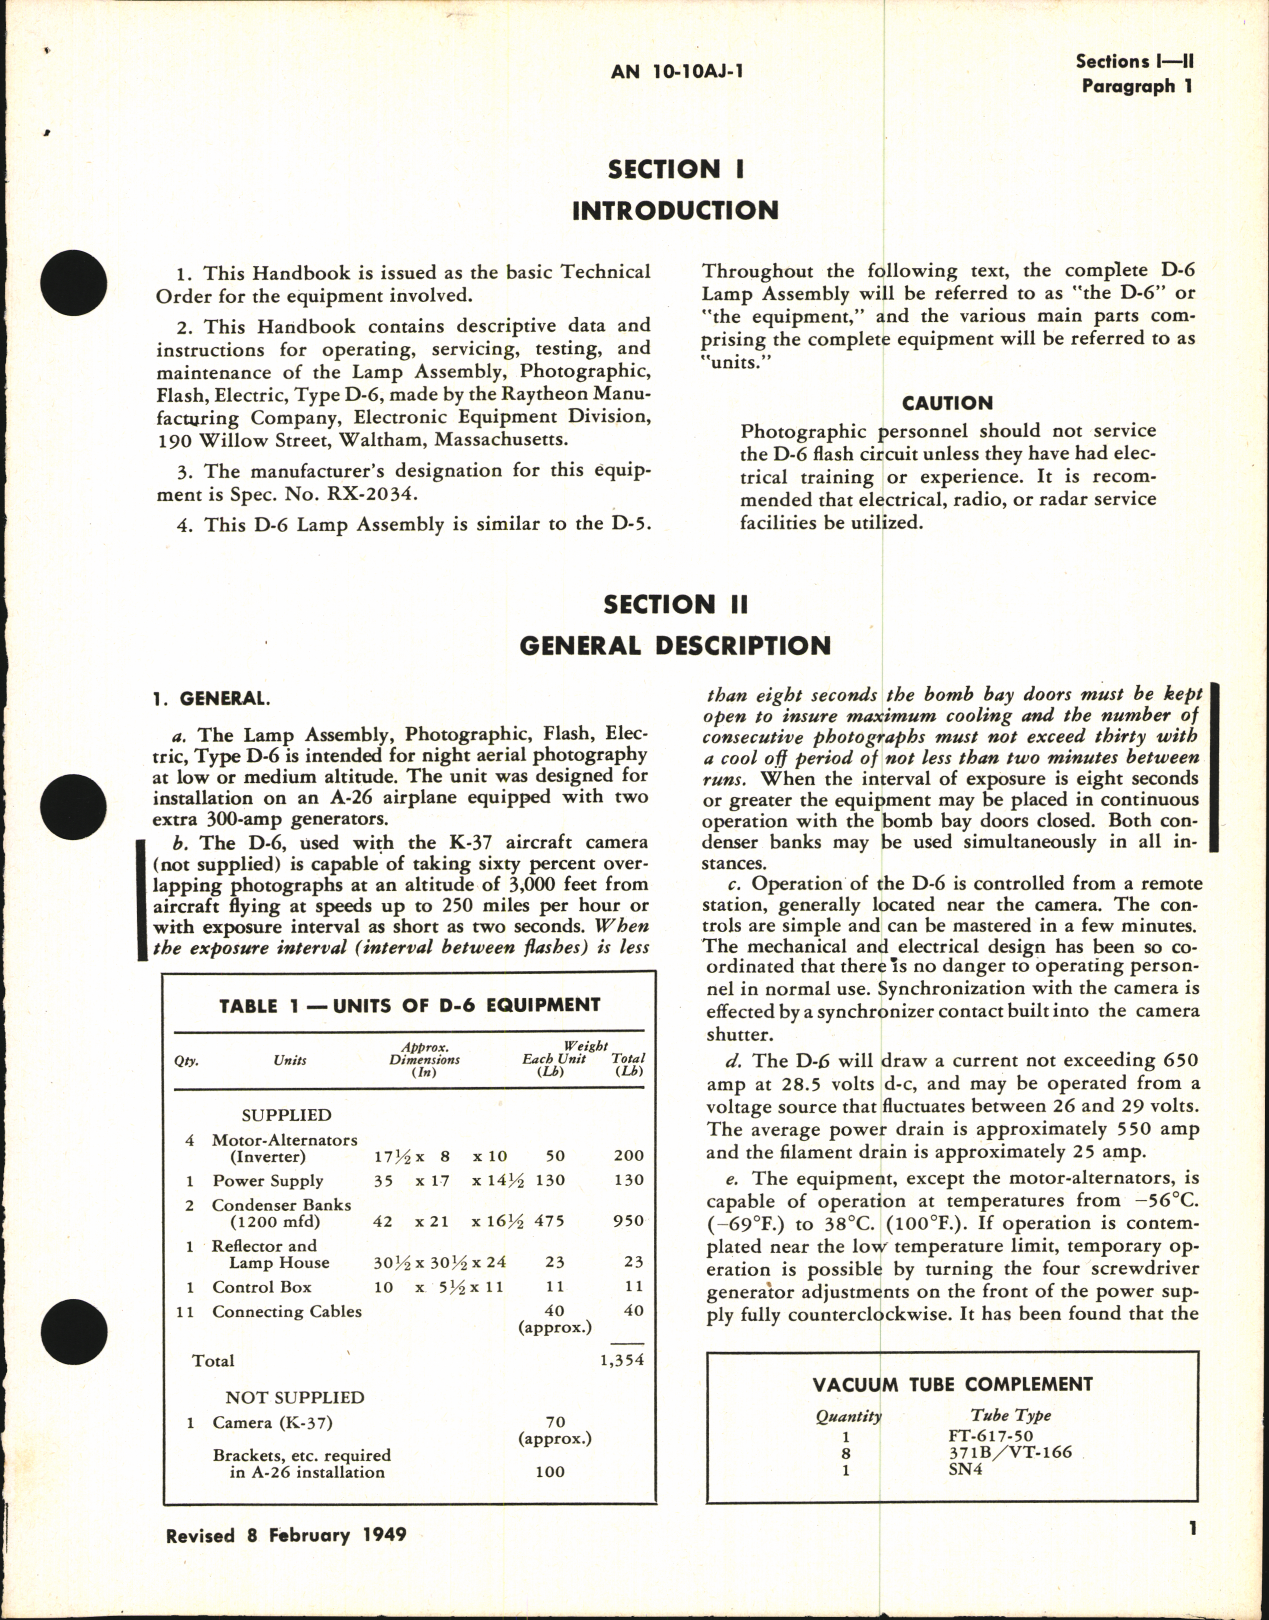 Sample page 7 from AirCorps Library document: Operation, Service, & Overhaul Instructions for Type D-6 Photographic Lamp Assembly